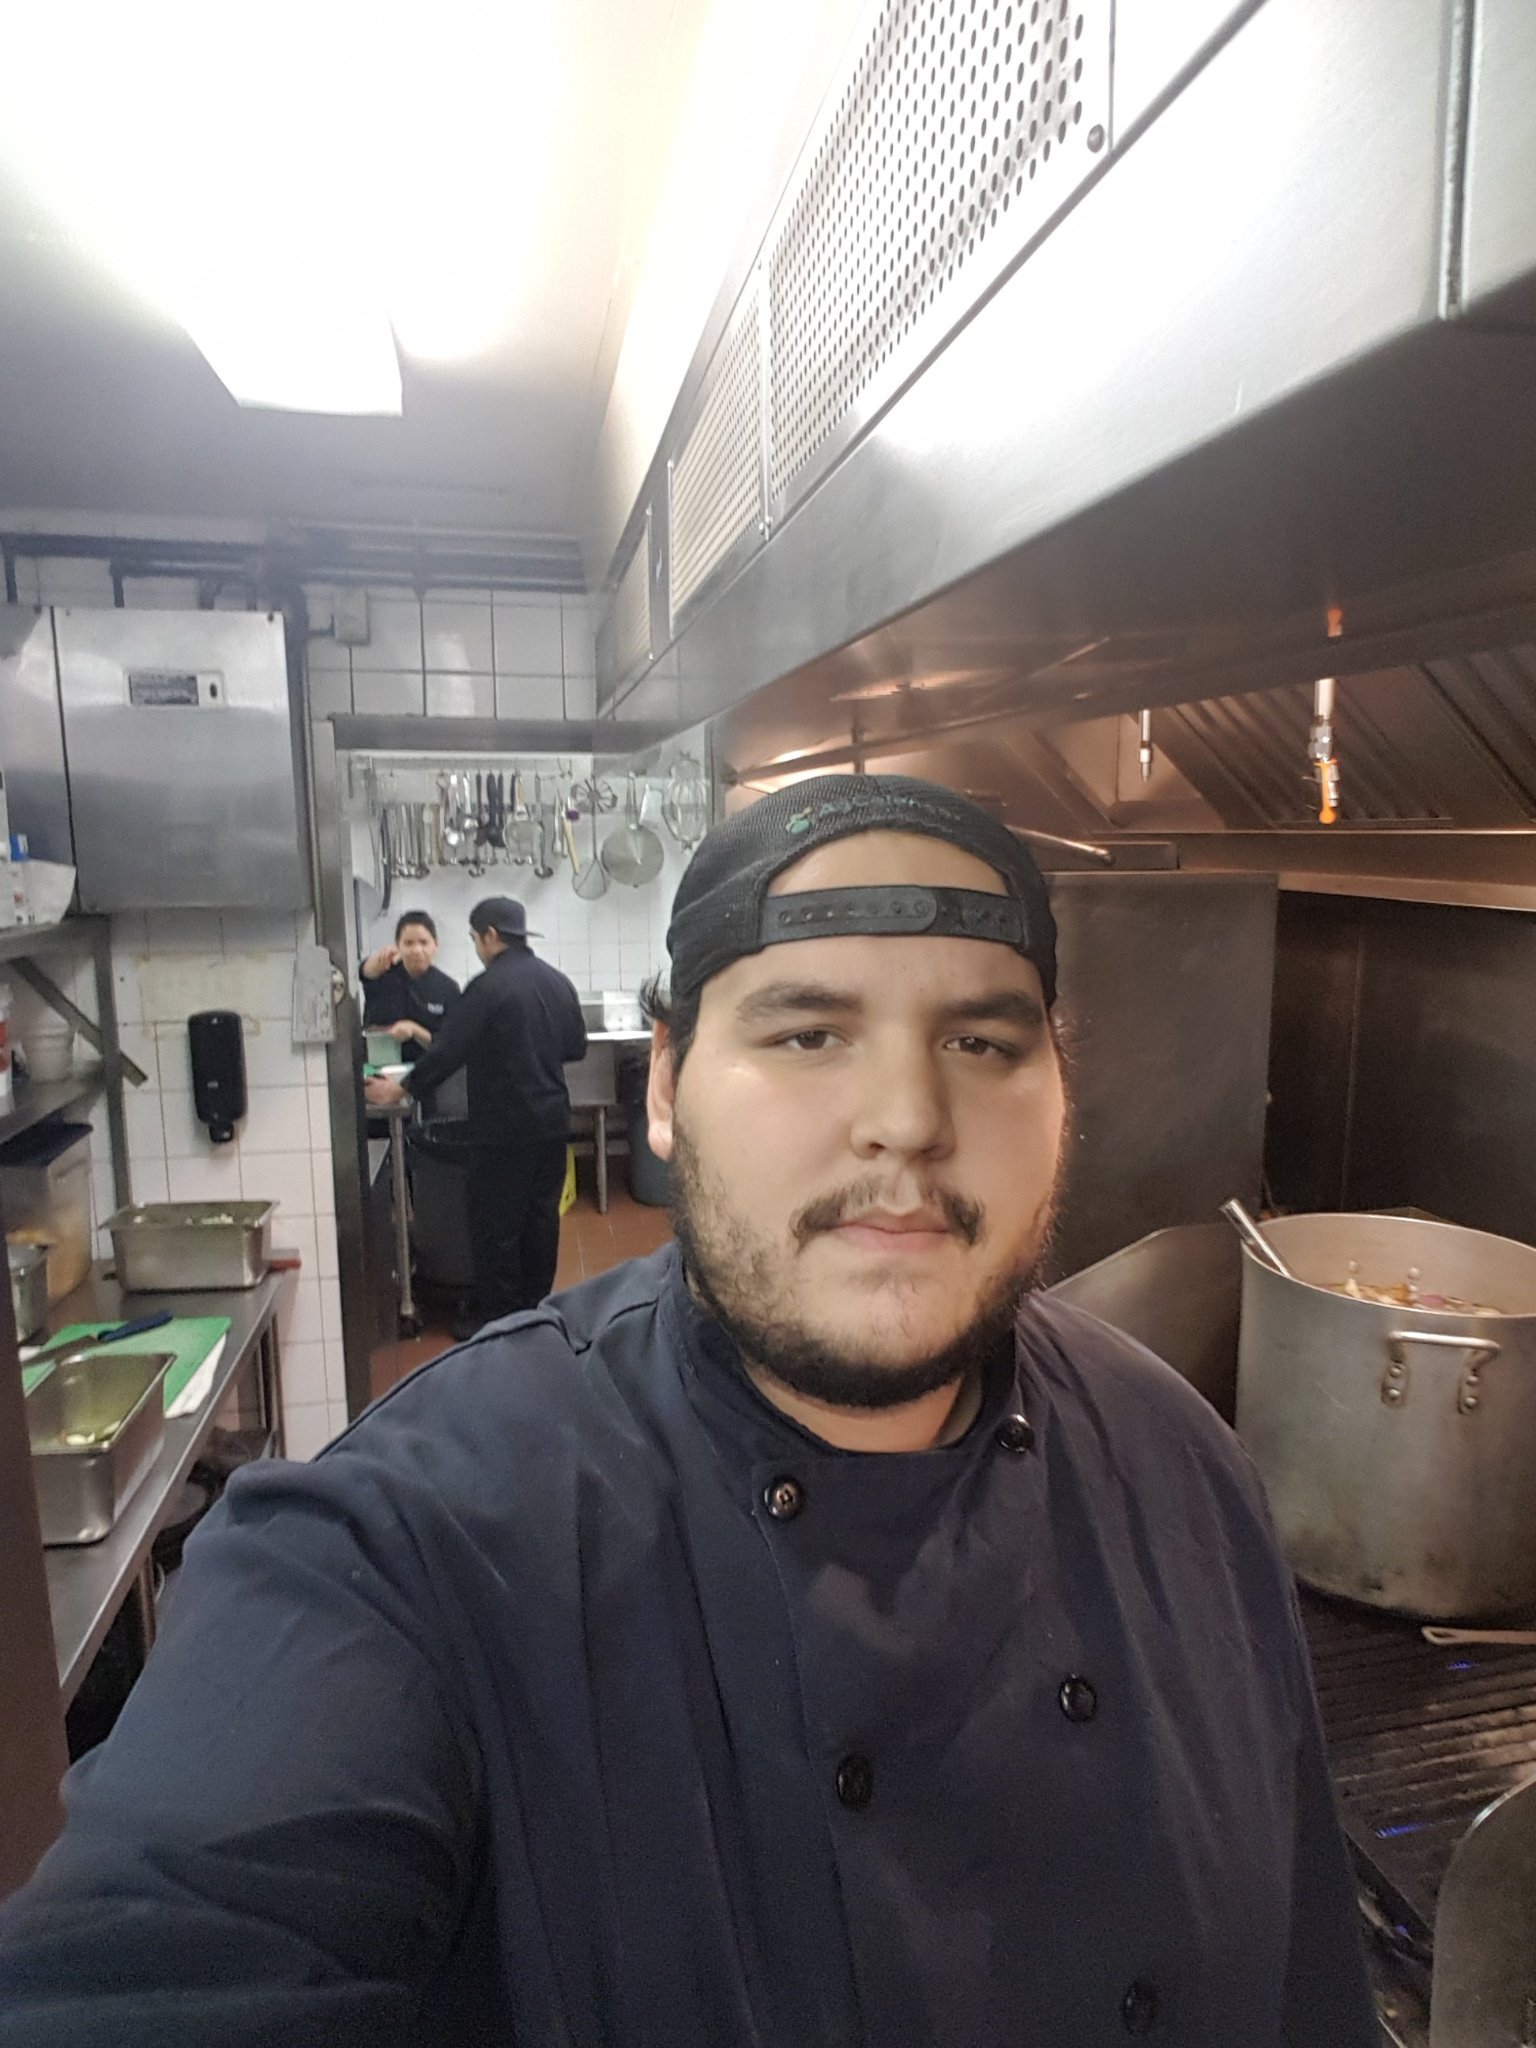 Just a chef who games thats about it..